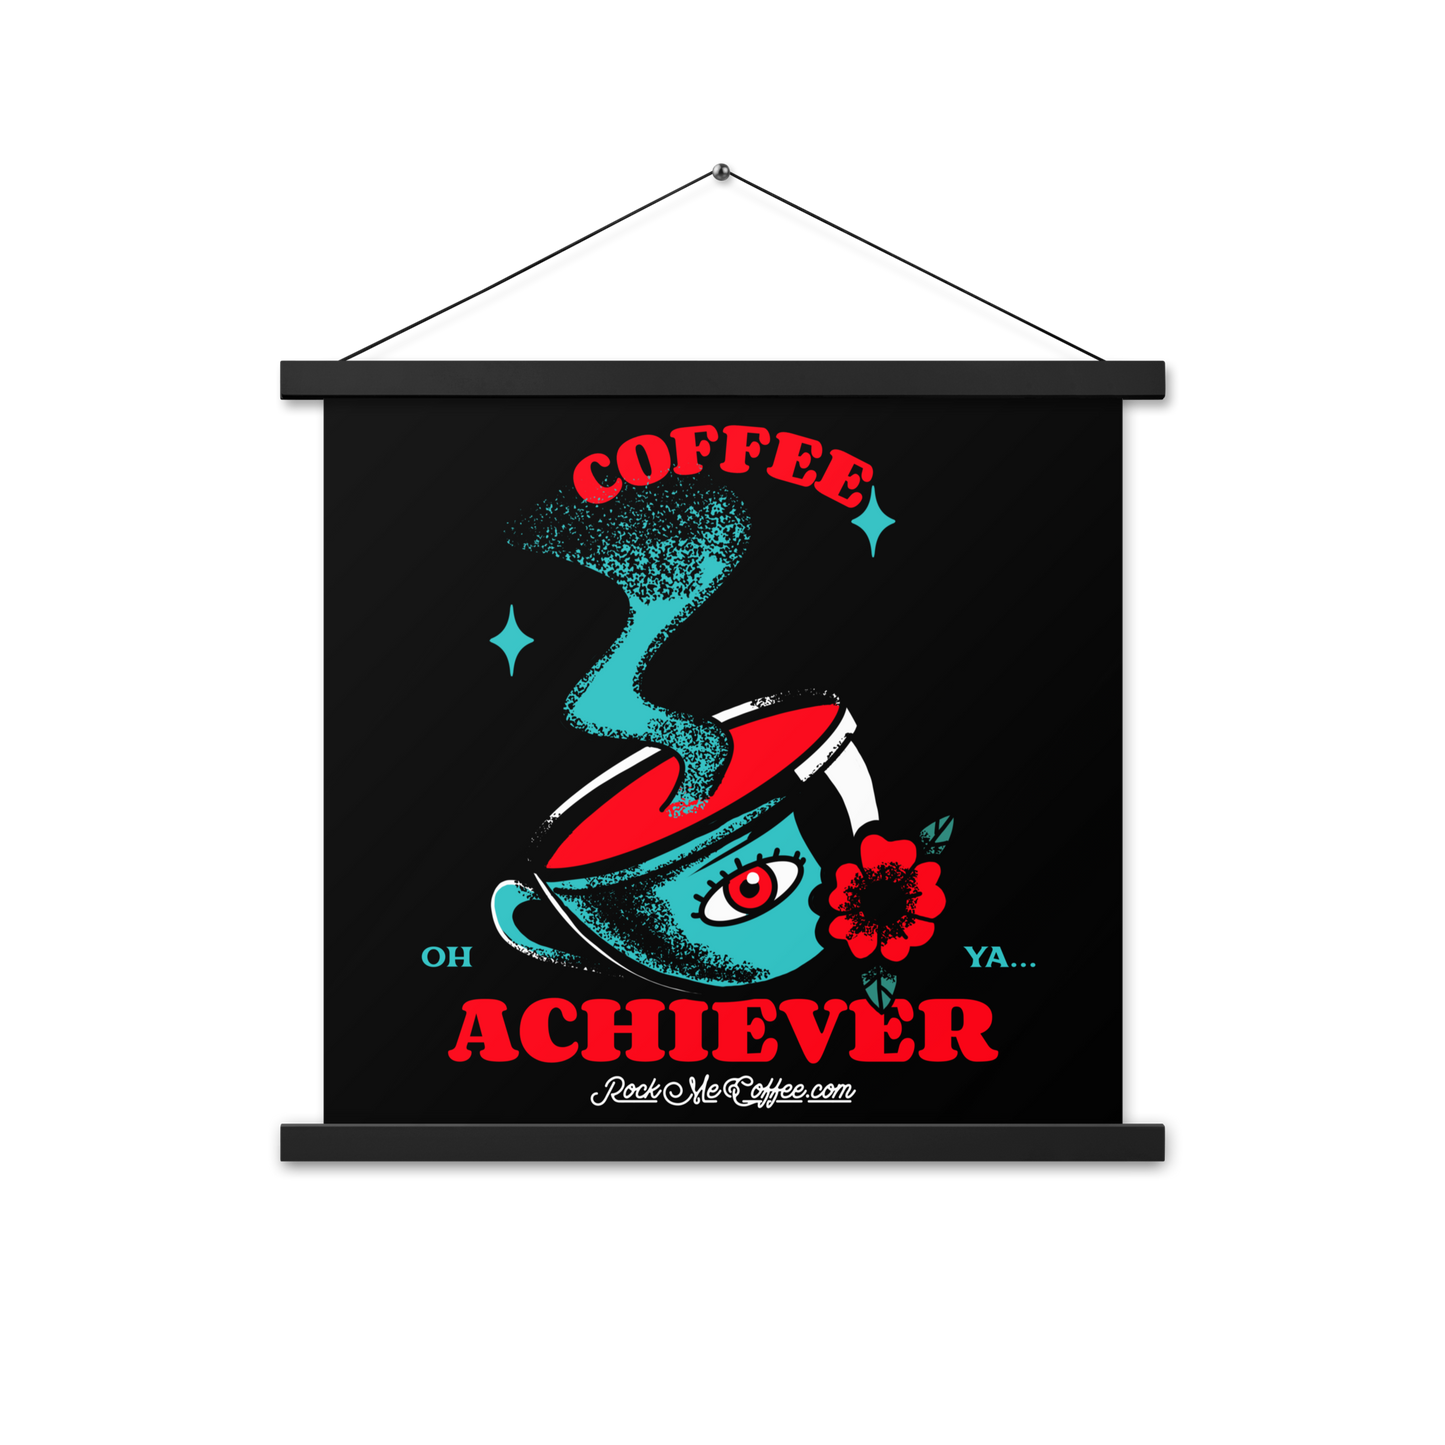 COFFEE ACHIEVER - Poster with hangers